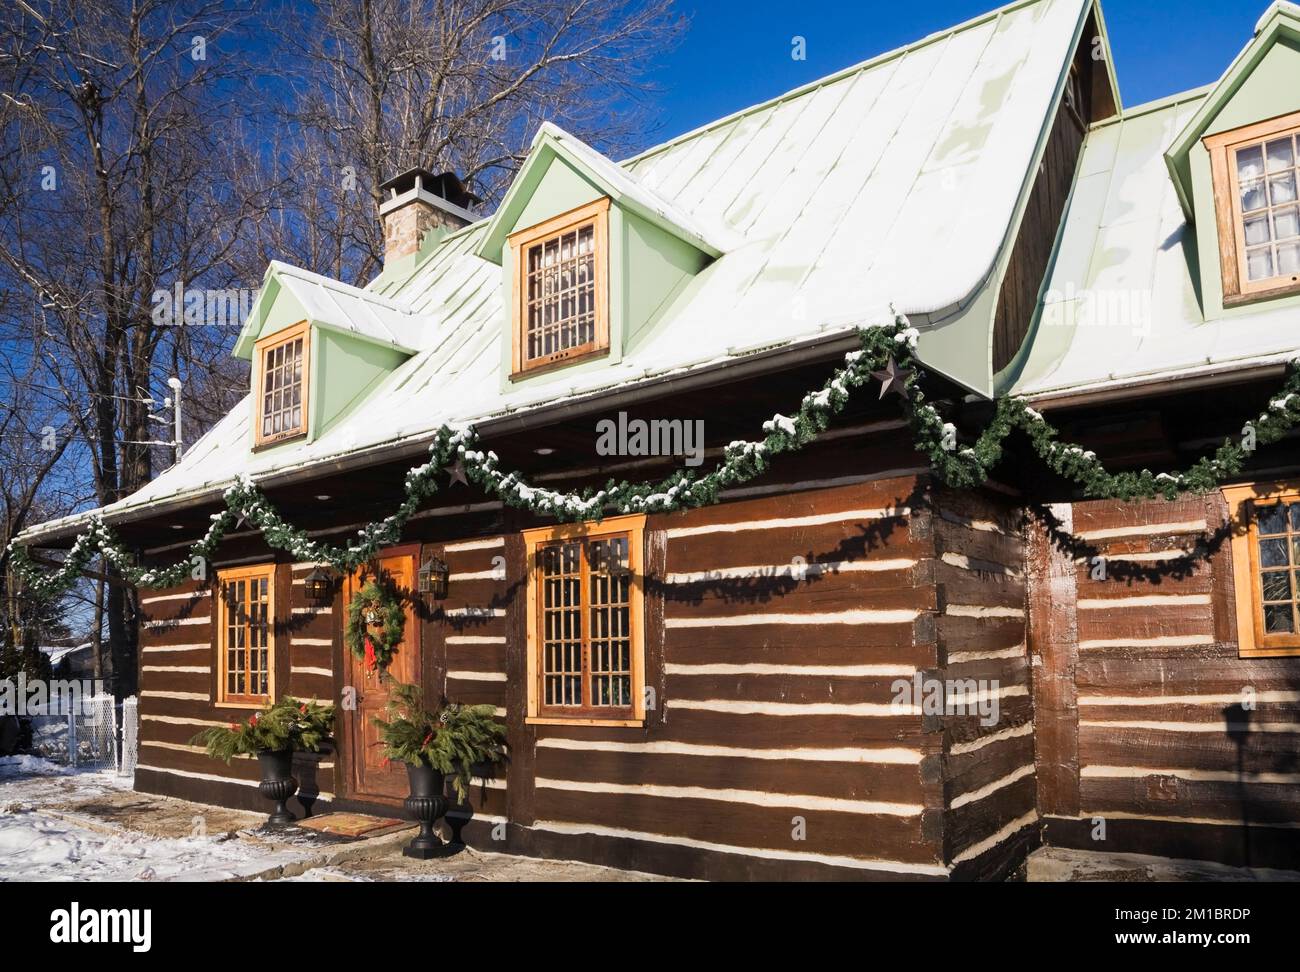 Old 1800s two story Canadiana cottage style log home with Christmas decorations in winter. Stock Photo